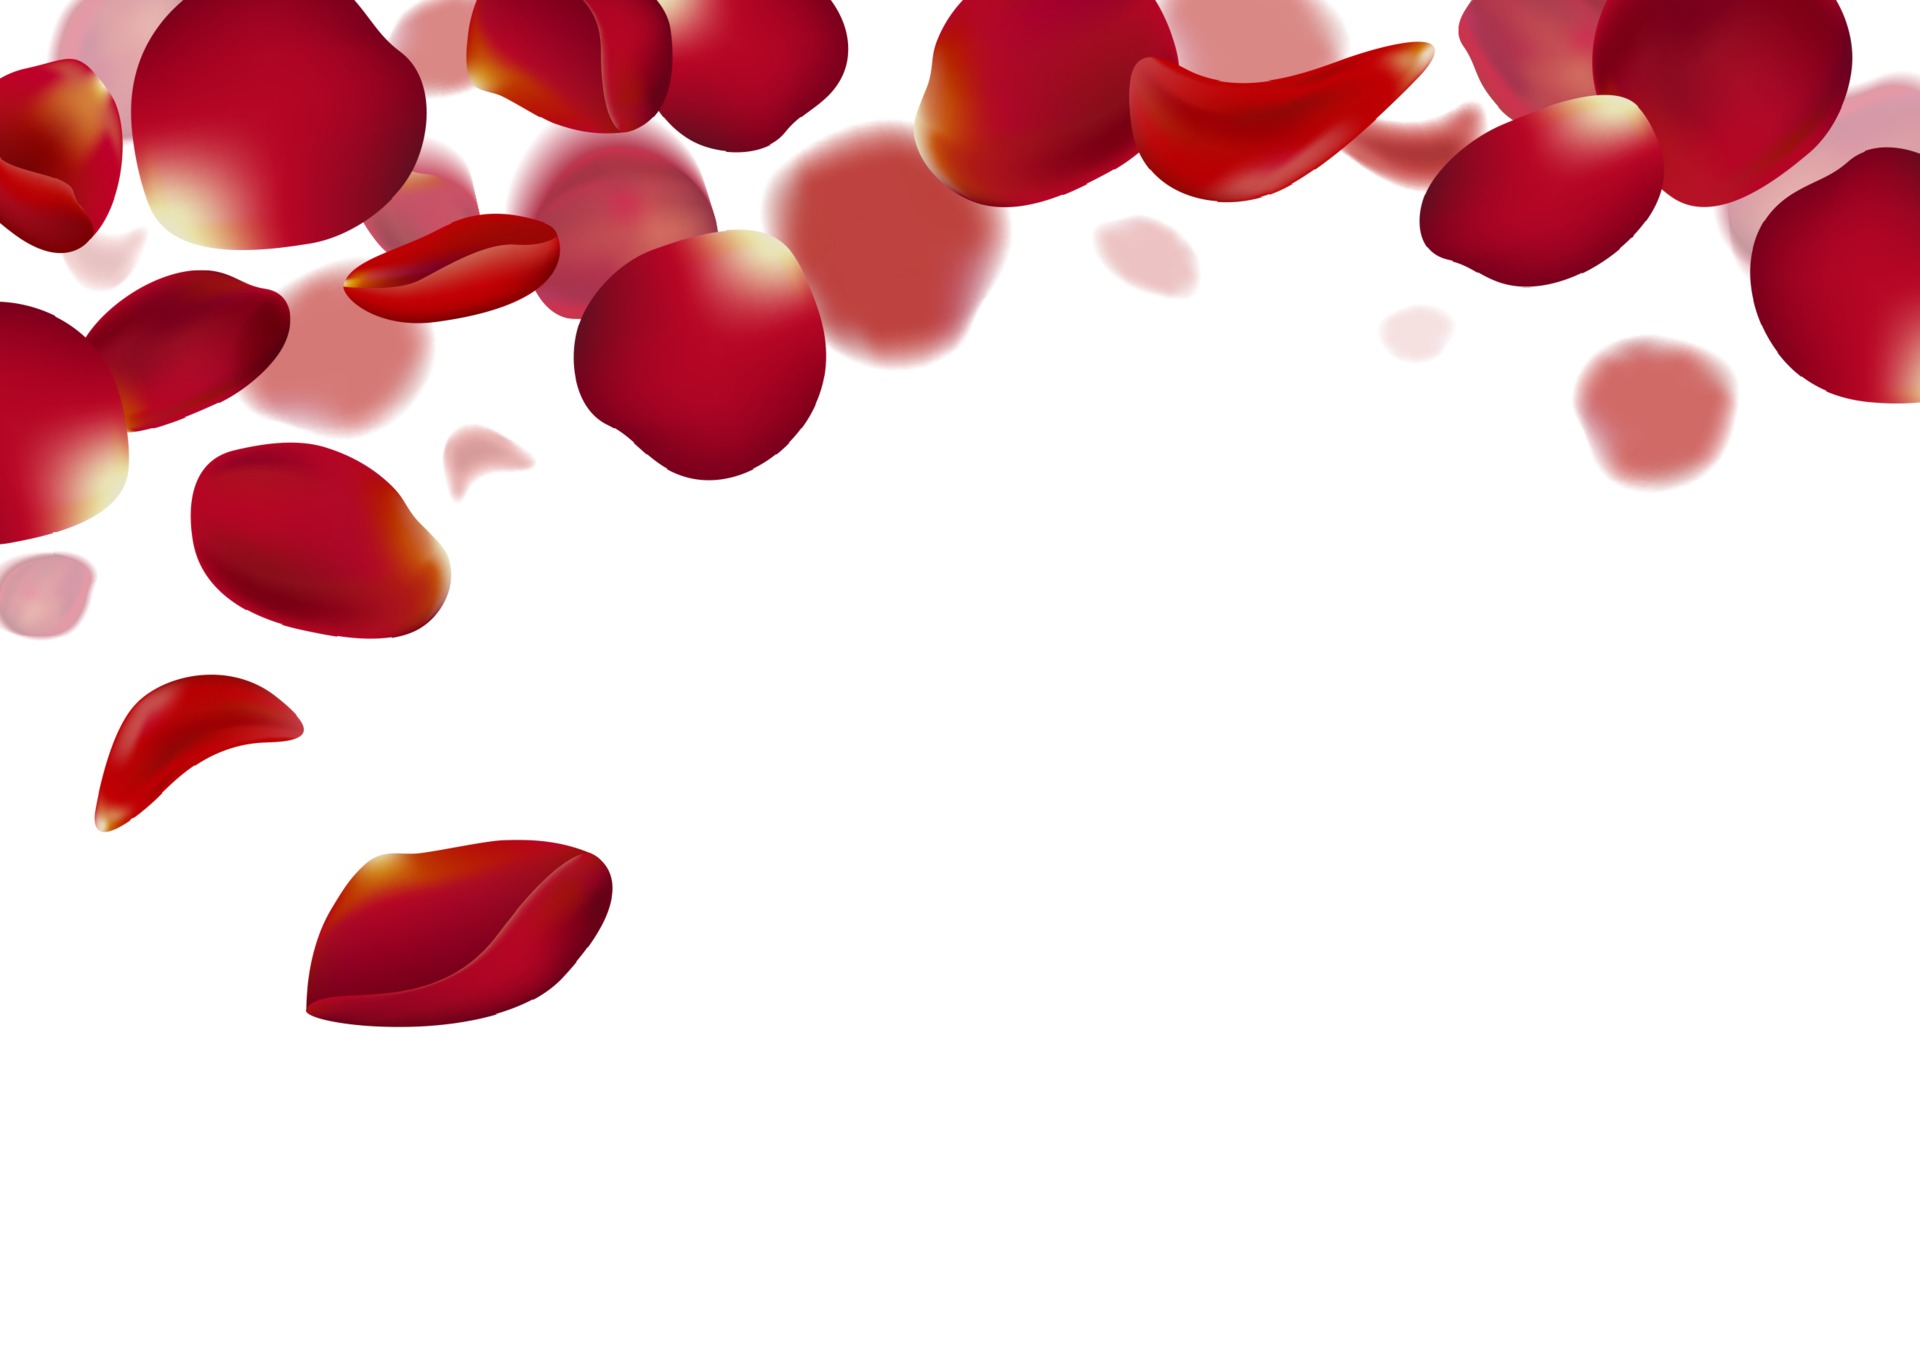 Red Rose Petals Falling On White Background Vector Illustration Download Free Vectors Clipart Graphics Vector Art